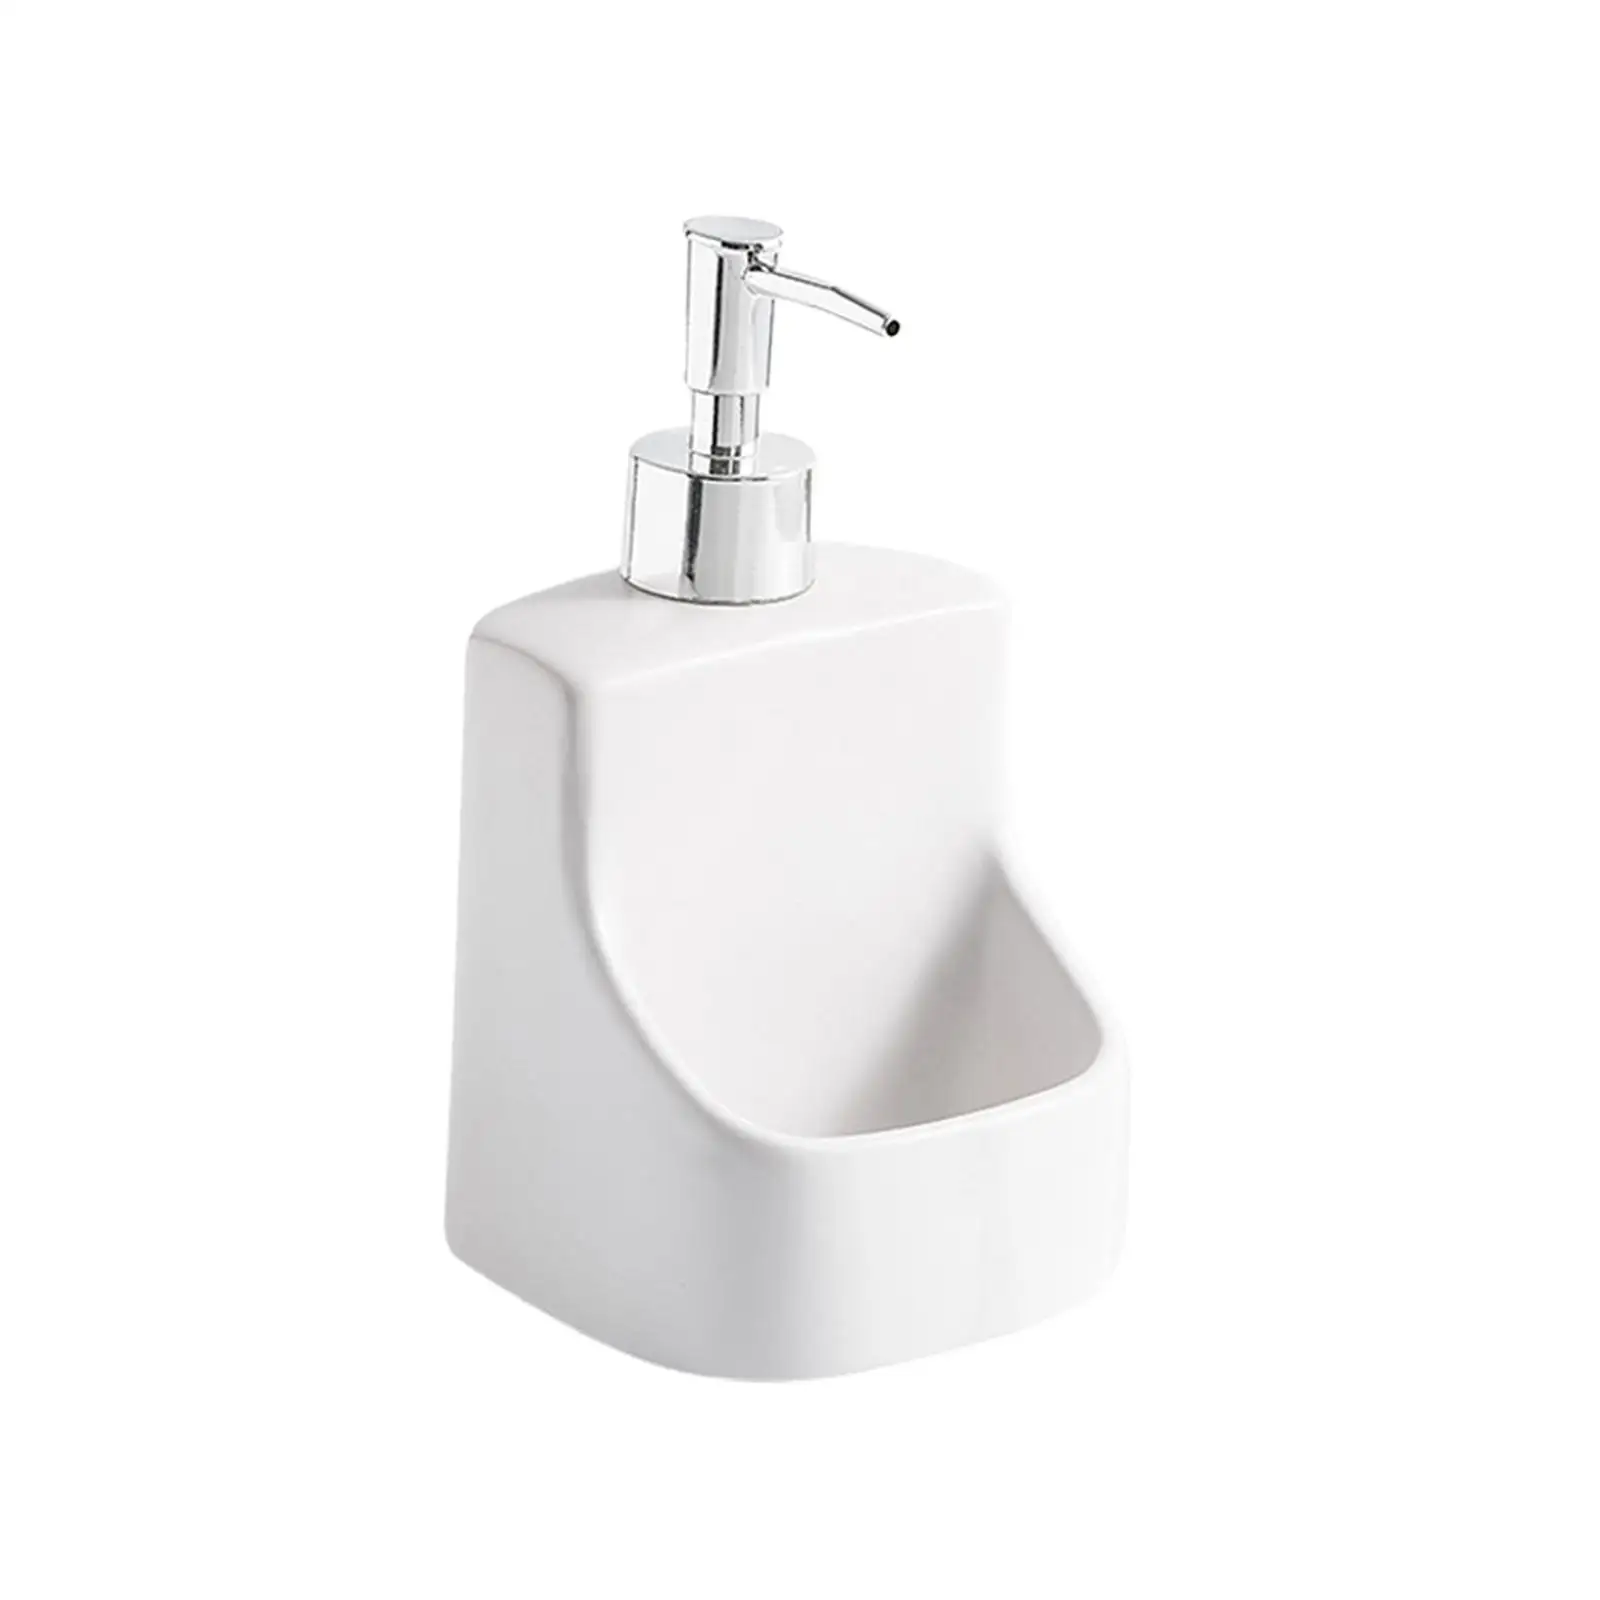 Hand Soap Dispenser Portable with Pump Reusable for Outdoor Bathroom Travel